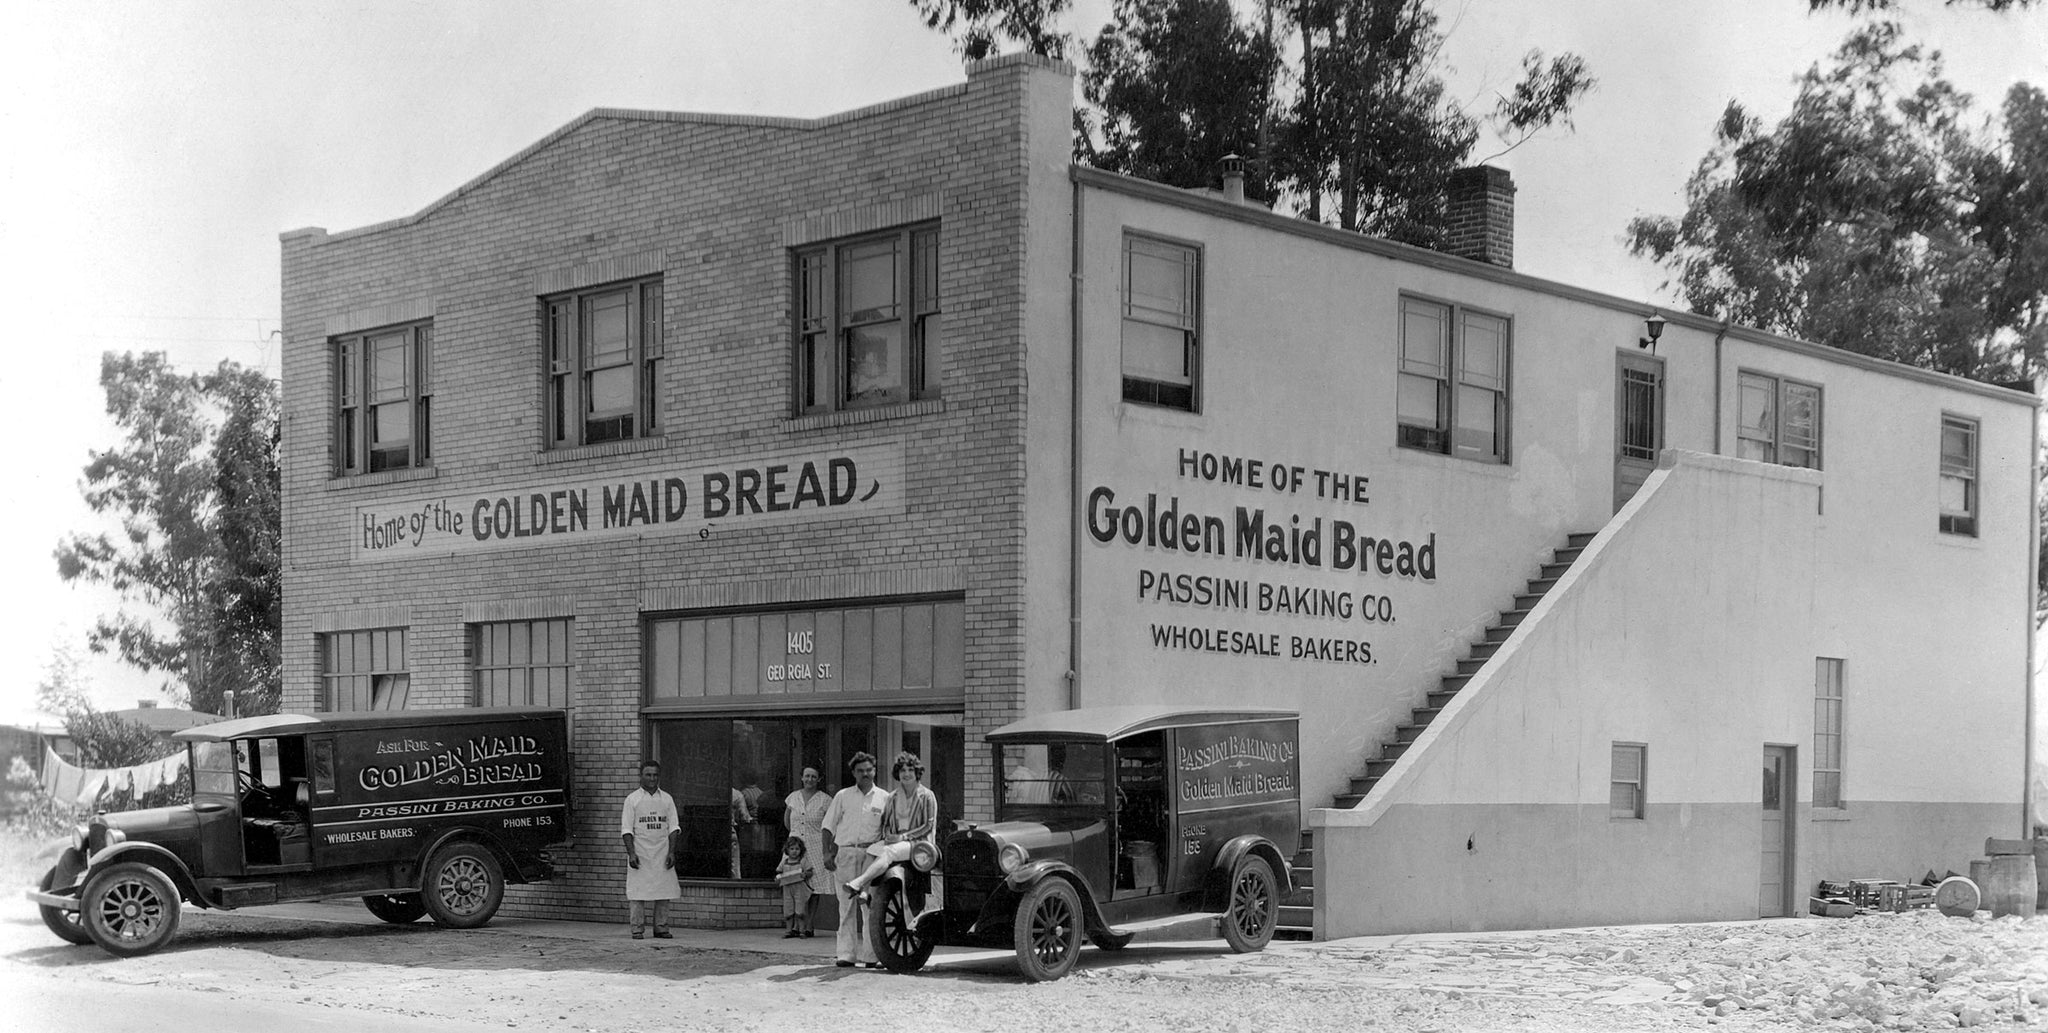 Passini Bakery, 1405 Georgia Street, circa 1933. The bakery produced Golden Maid Bread and wholesale baked products. The business was at this same location until 1971. On the left is Charles “Moonie” Passini. Standing next to the car is Alfonso “Sunshine” Passini, Charles’s brother and partner. Upstairs were apartments. -- Courtesy Arlene Passini